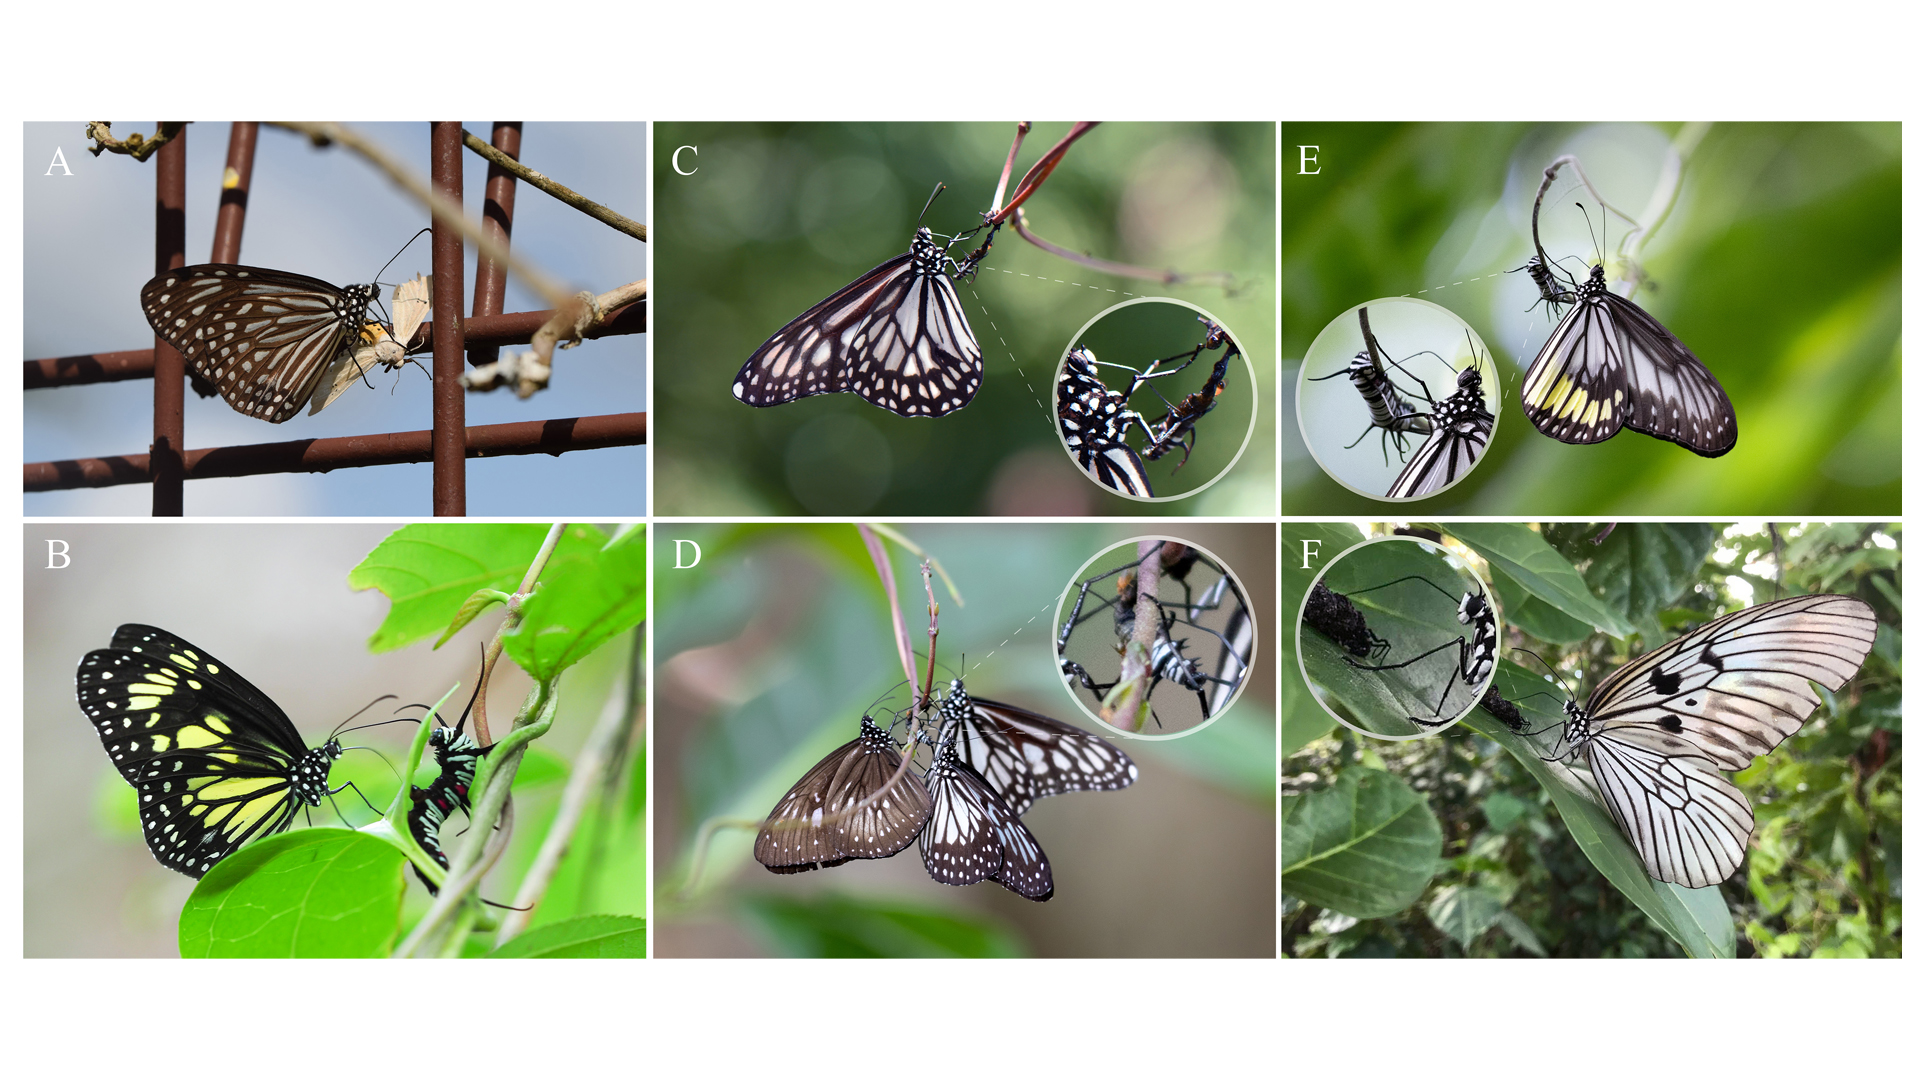 Danainae butterflies drink from dead and living caterpillars. A: Parantica agleoides agleoides feeding on an arctiine moth carcass in Singapore. B to F: Various species of danaine observed in Tangkoko Batuangus Nature Reserve, North Sulawesi scratching and imbibing from living and dead caterpillars of Idea blanchardii blanchardii. Caterpillars are dead in panels C, D, and F, but alive in B and E.